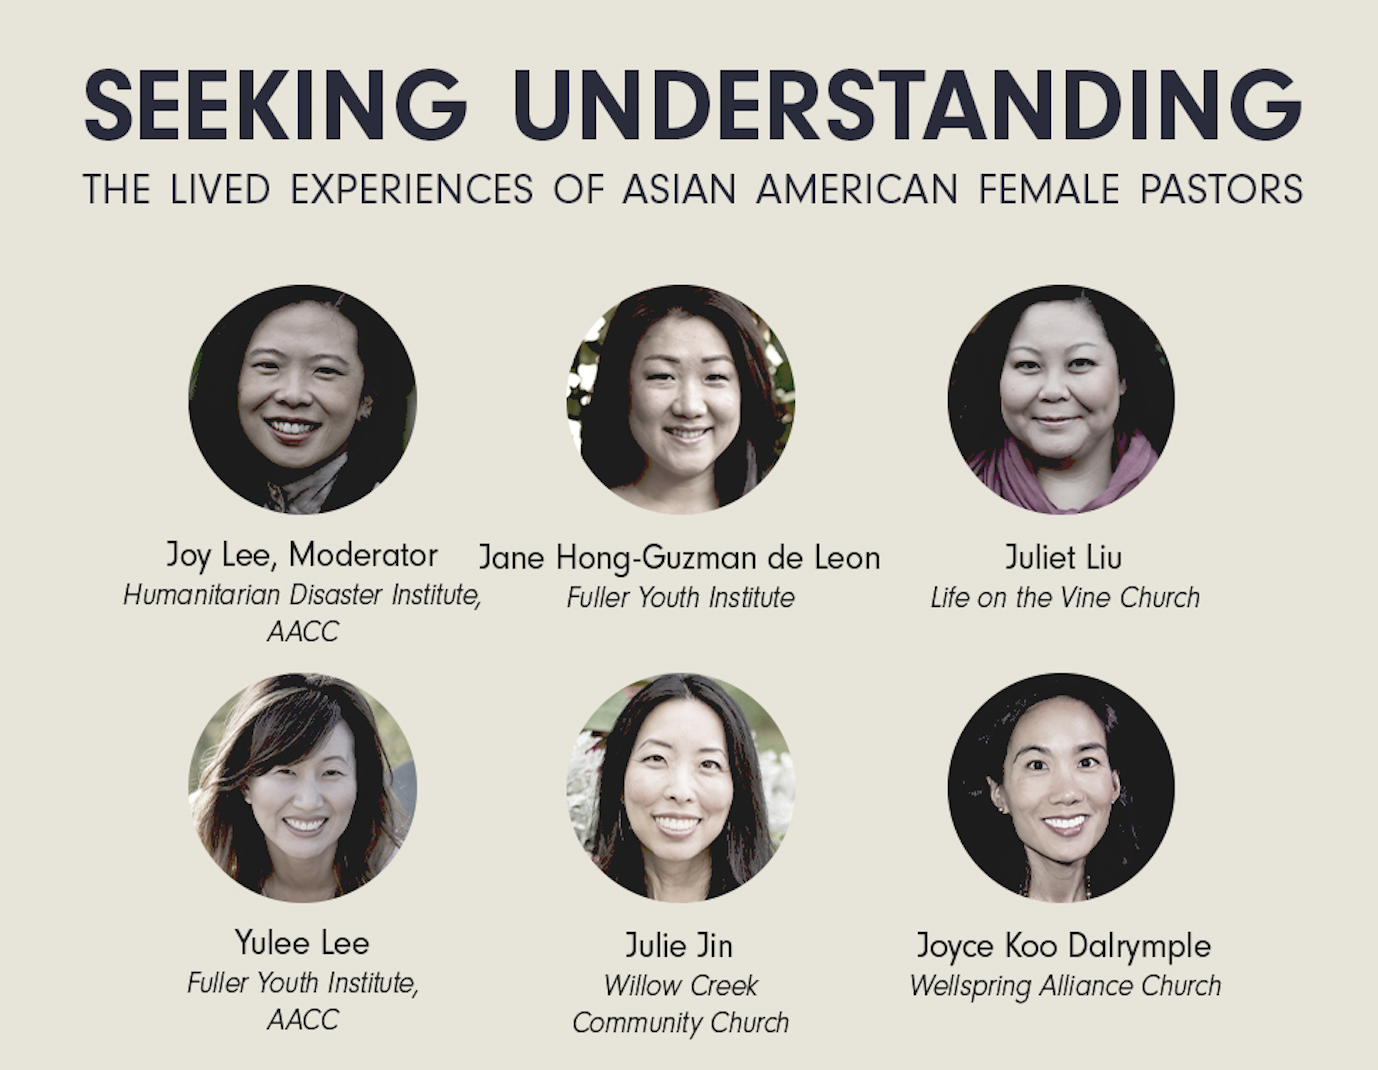 Lived Experiences of Asian American Female Pastors @ December 3, 2021 in Chicago